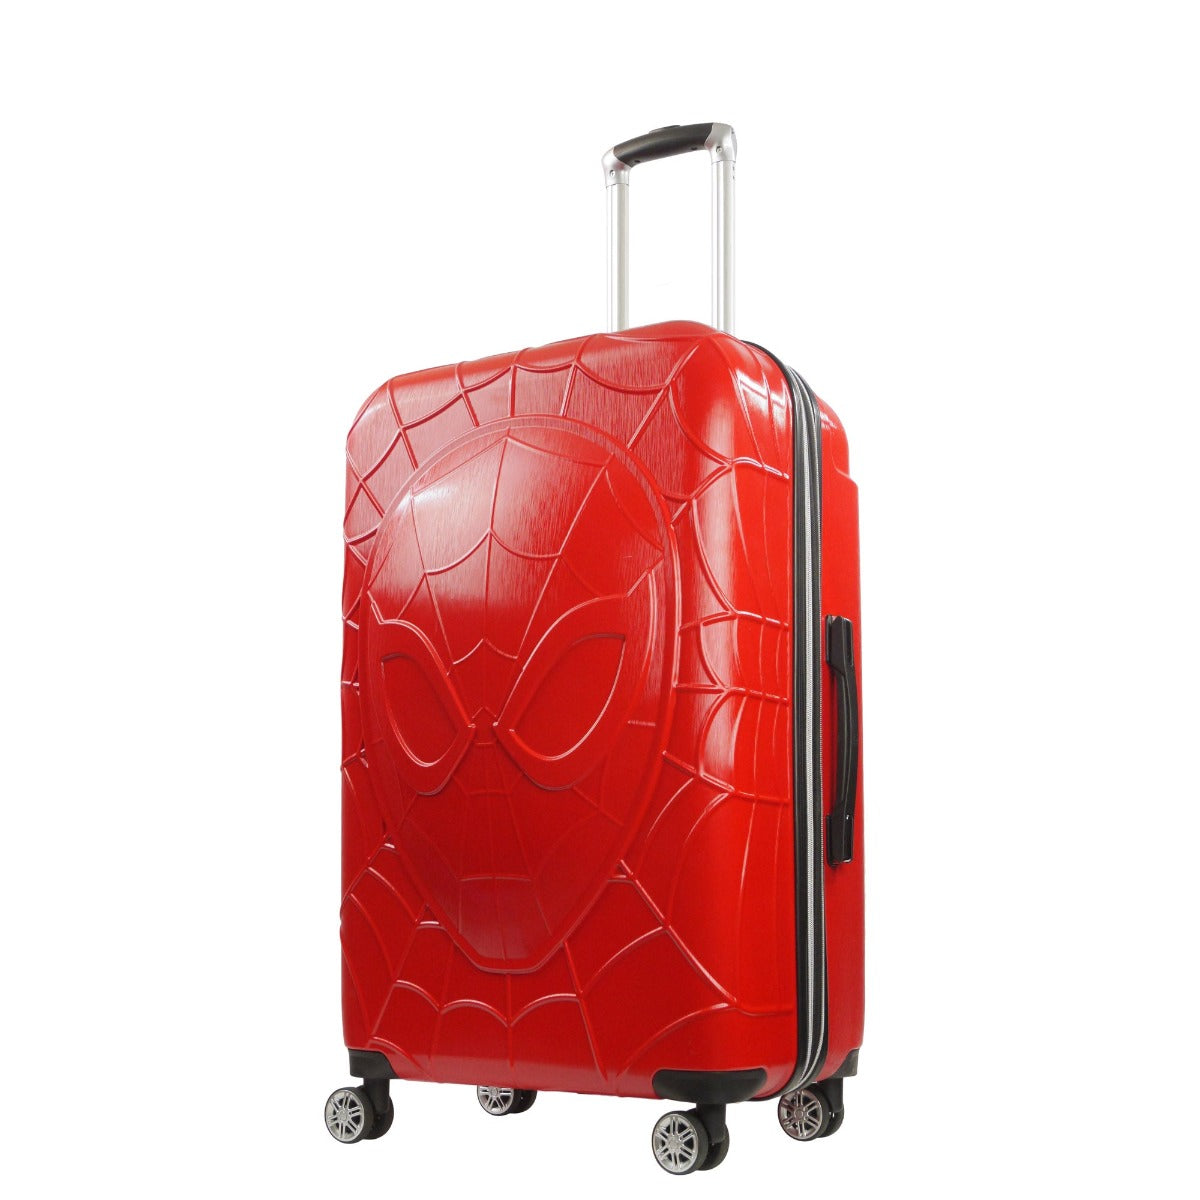 Marvel Spiderman Hard-sided Expandable Spinner Suitcase 29" Luggage Red